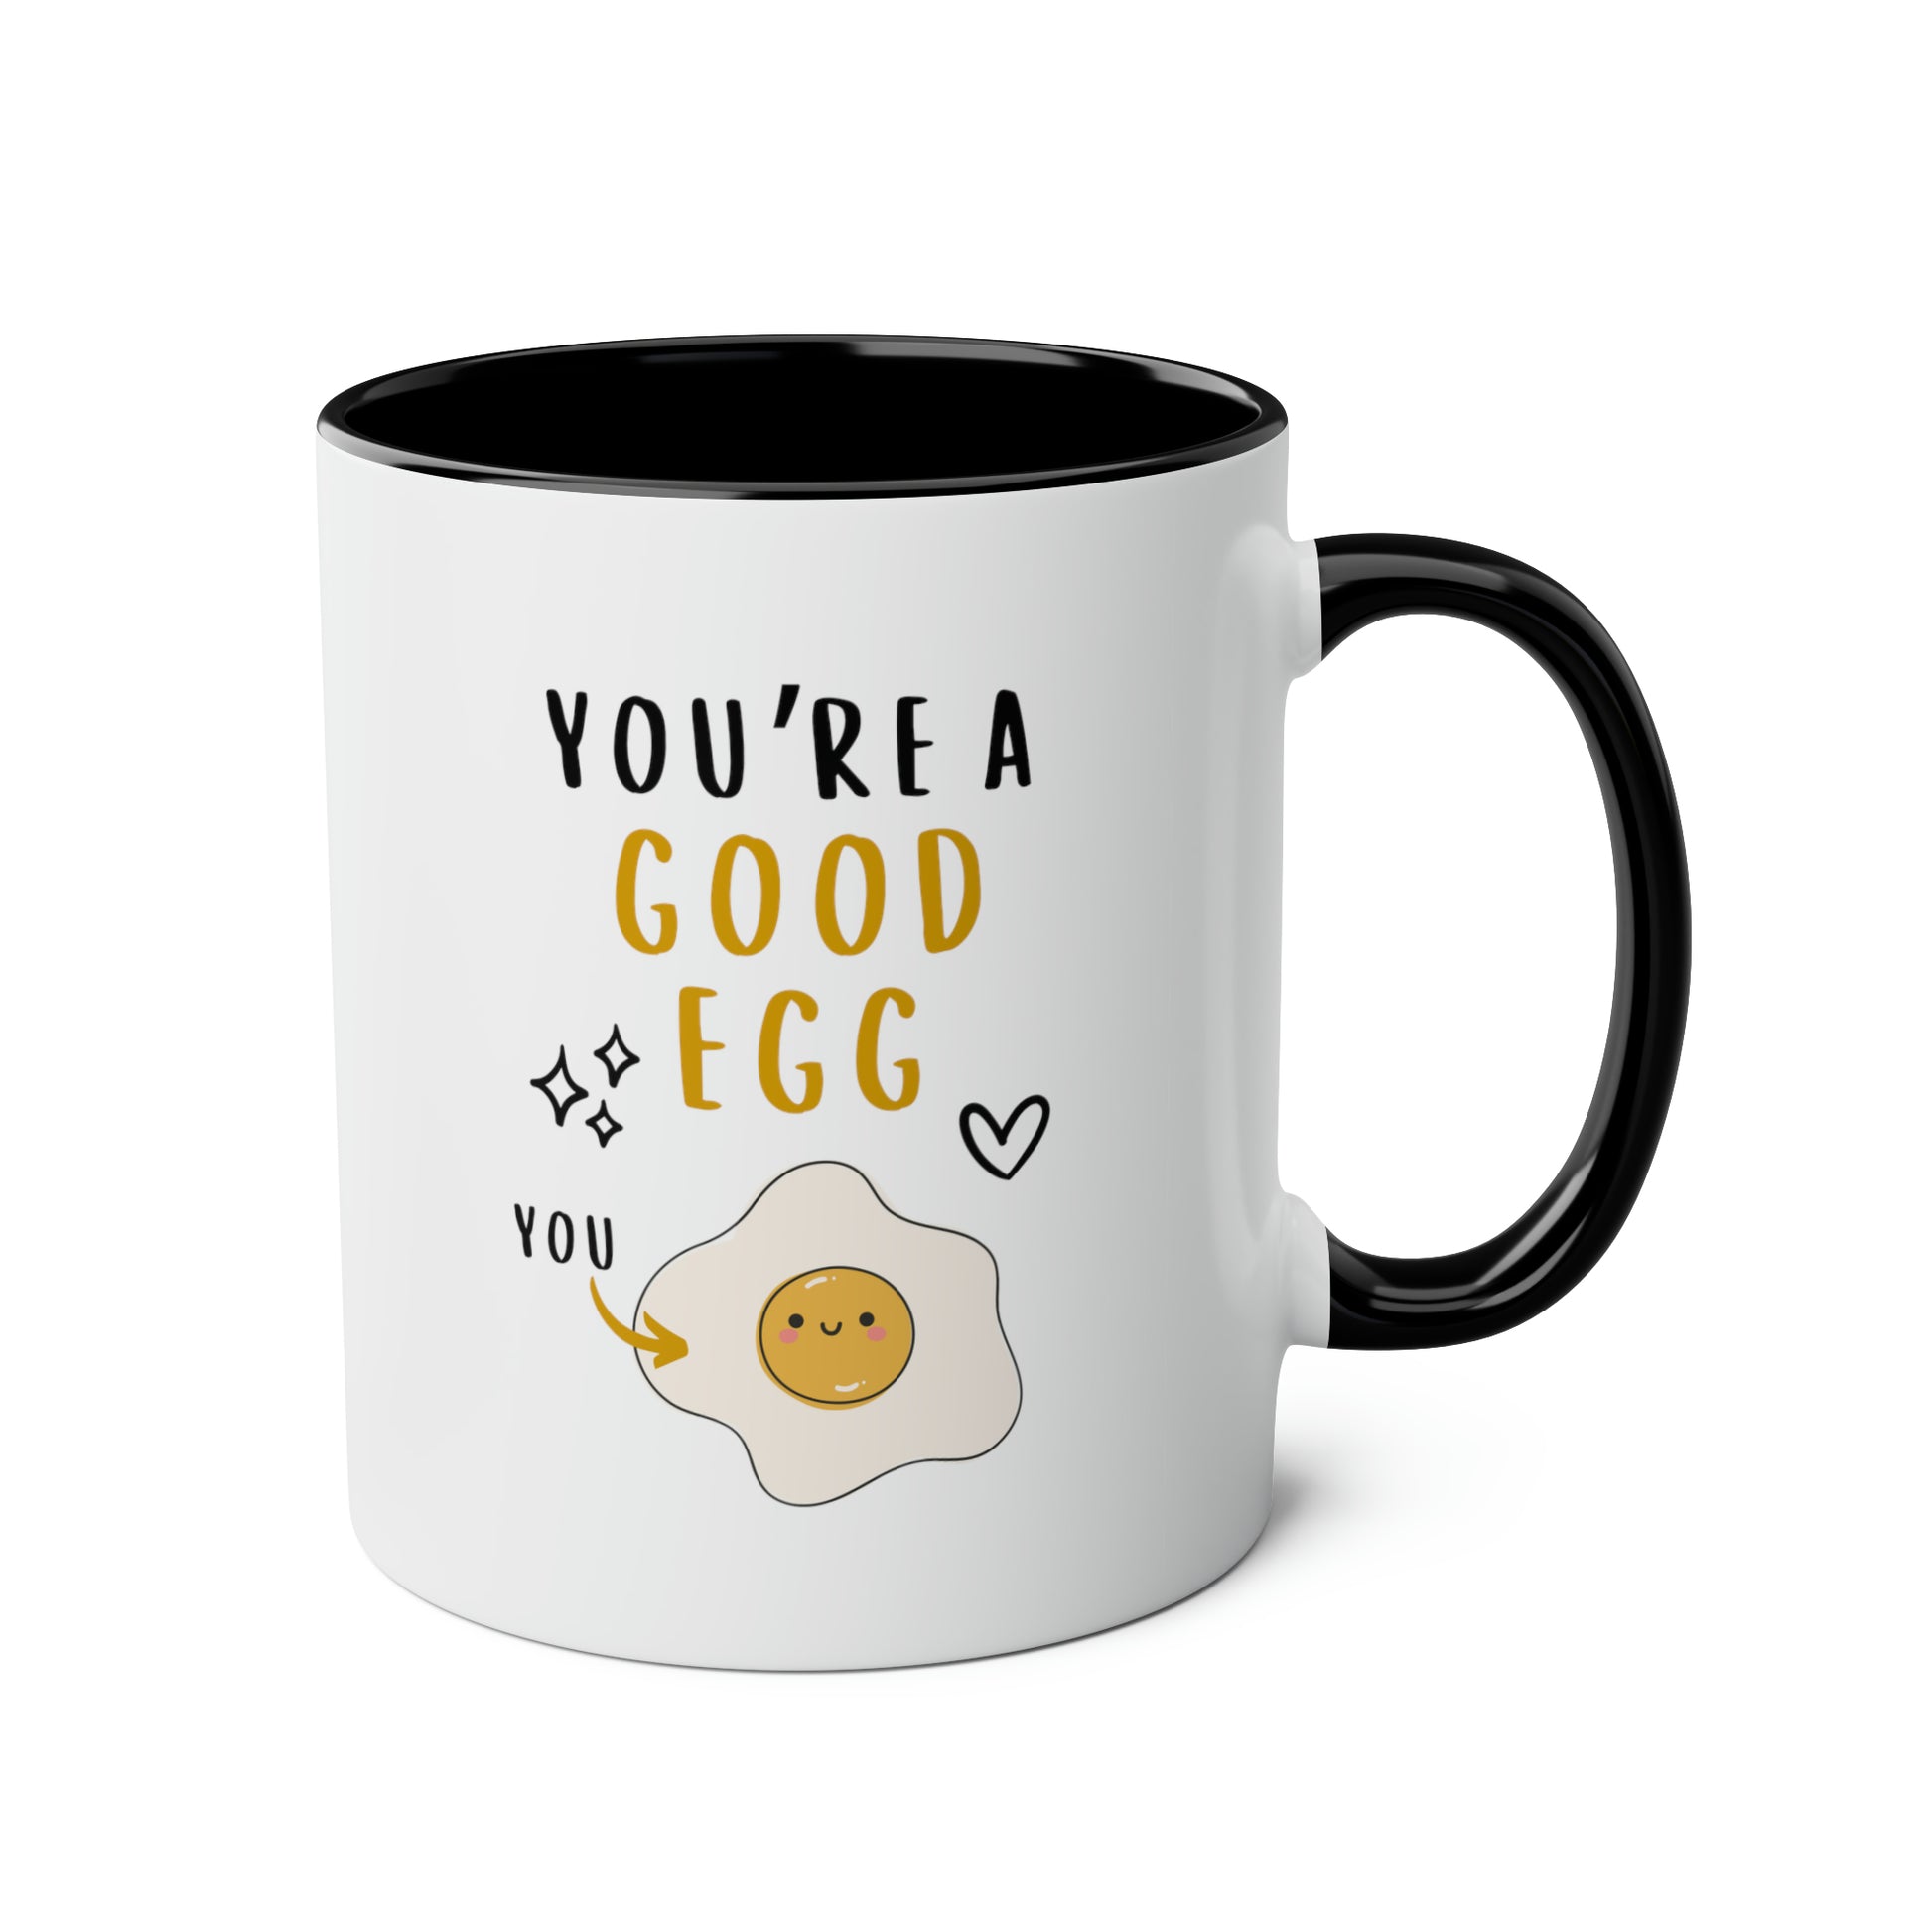 Youre a good egg 11oz white with black accent funny coffee mug tea cup gift for bff friend mothers day gift waveywares wavey wares wavywares wavy wares